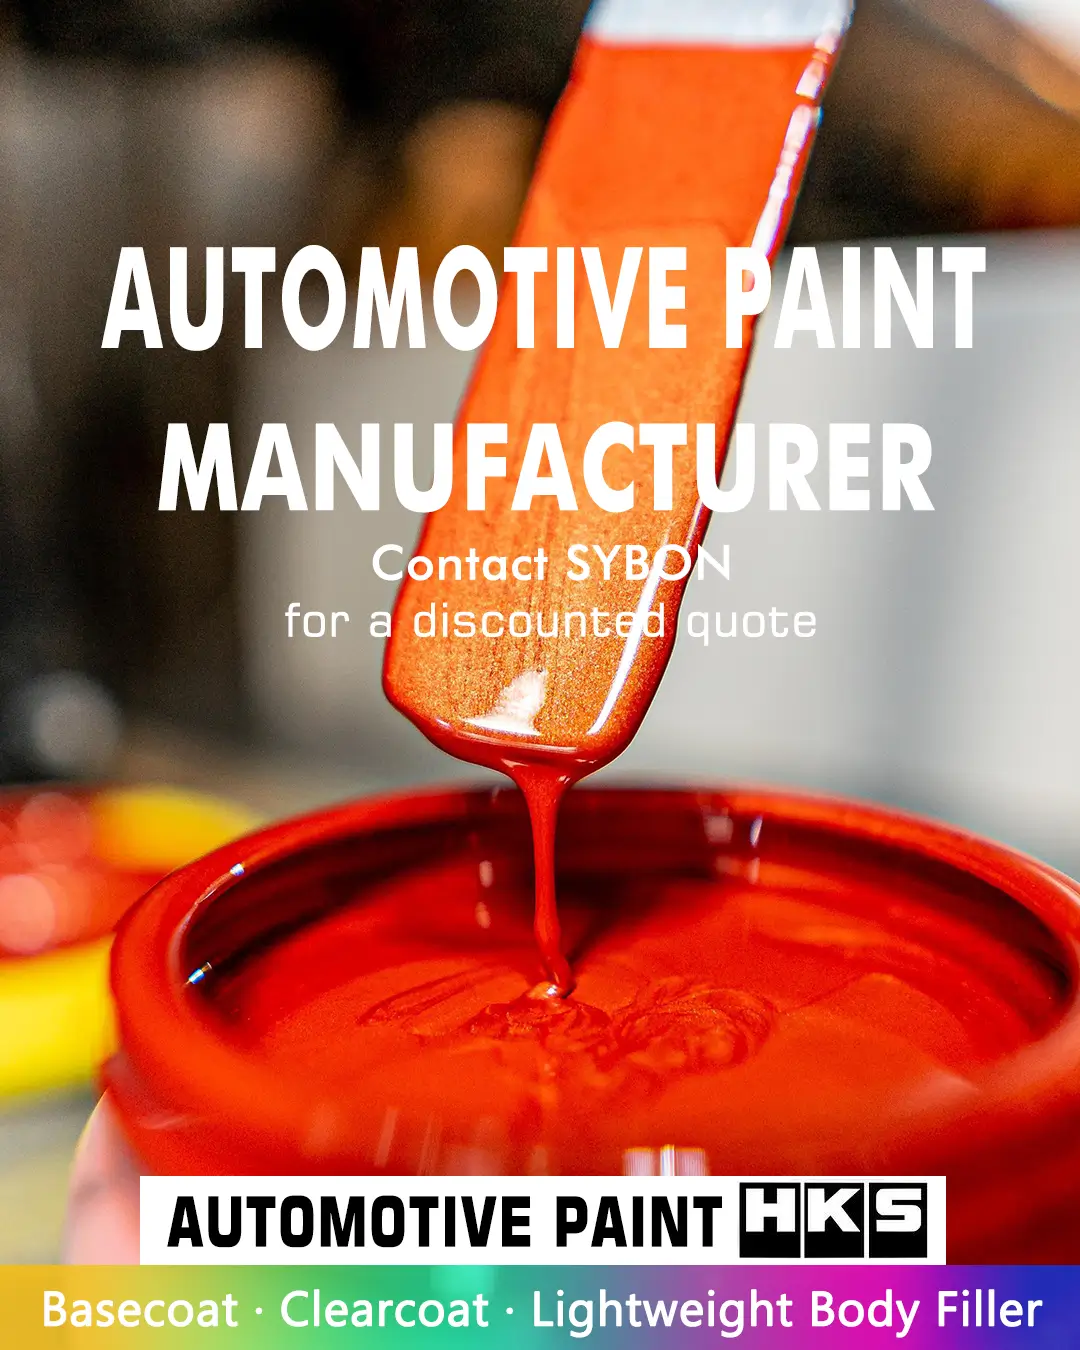 1701412096 Empowering Auto Paint Retailers SYBONs Quality Products and Strategic Partnerships